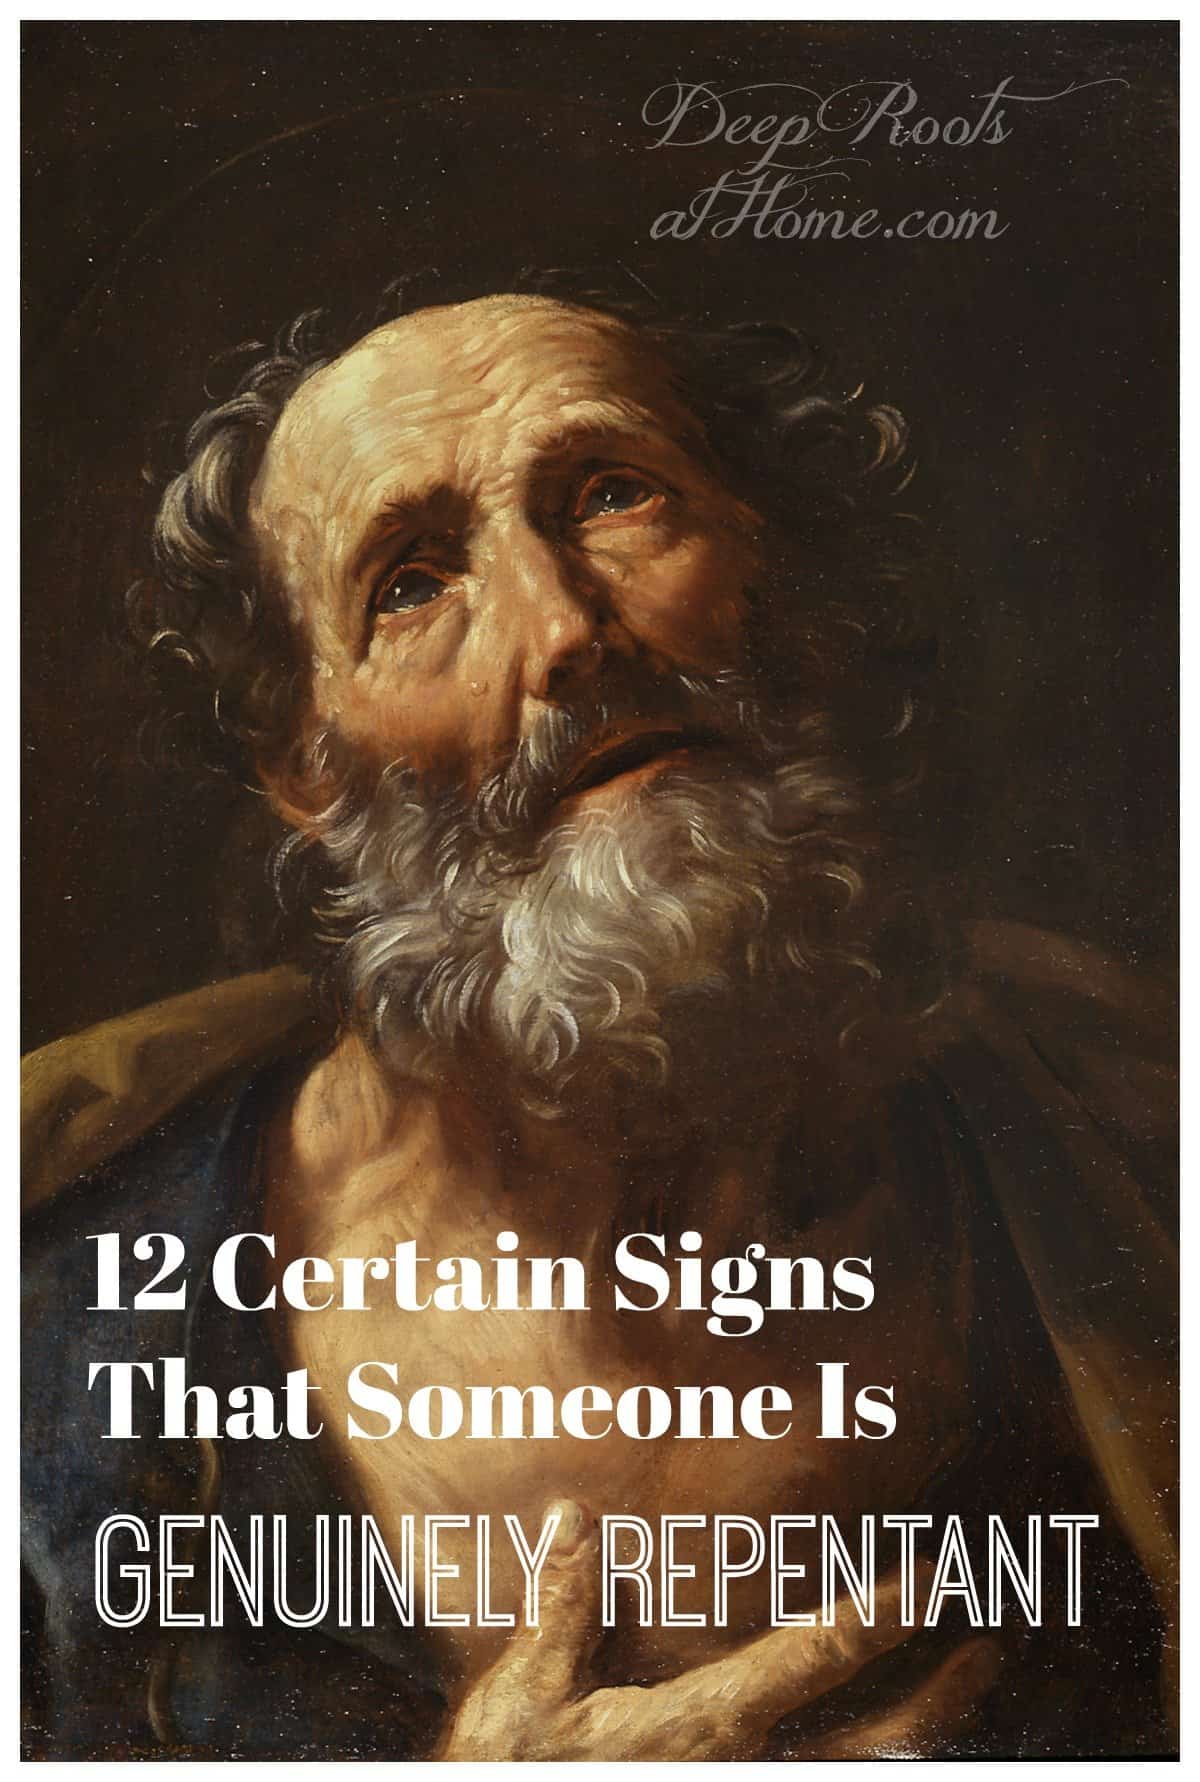 12 Certain Signs That Someone Is Genuinely Repentant. St Peter grieves denying Christ 